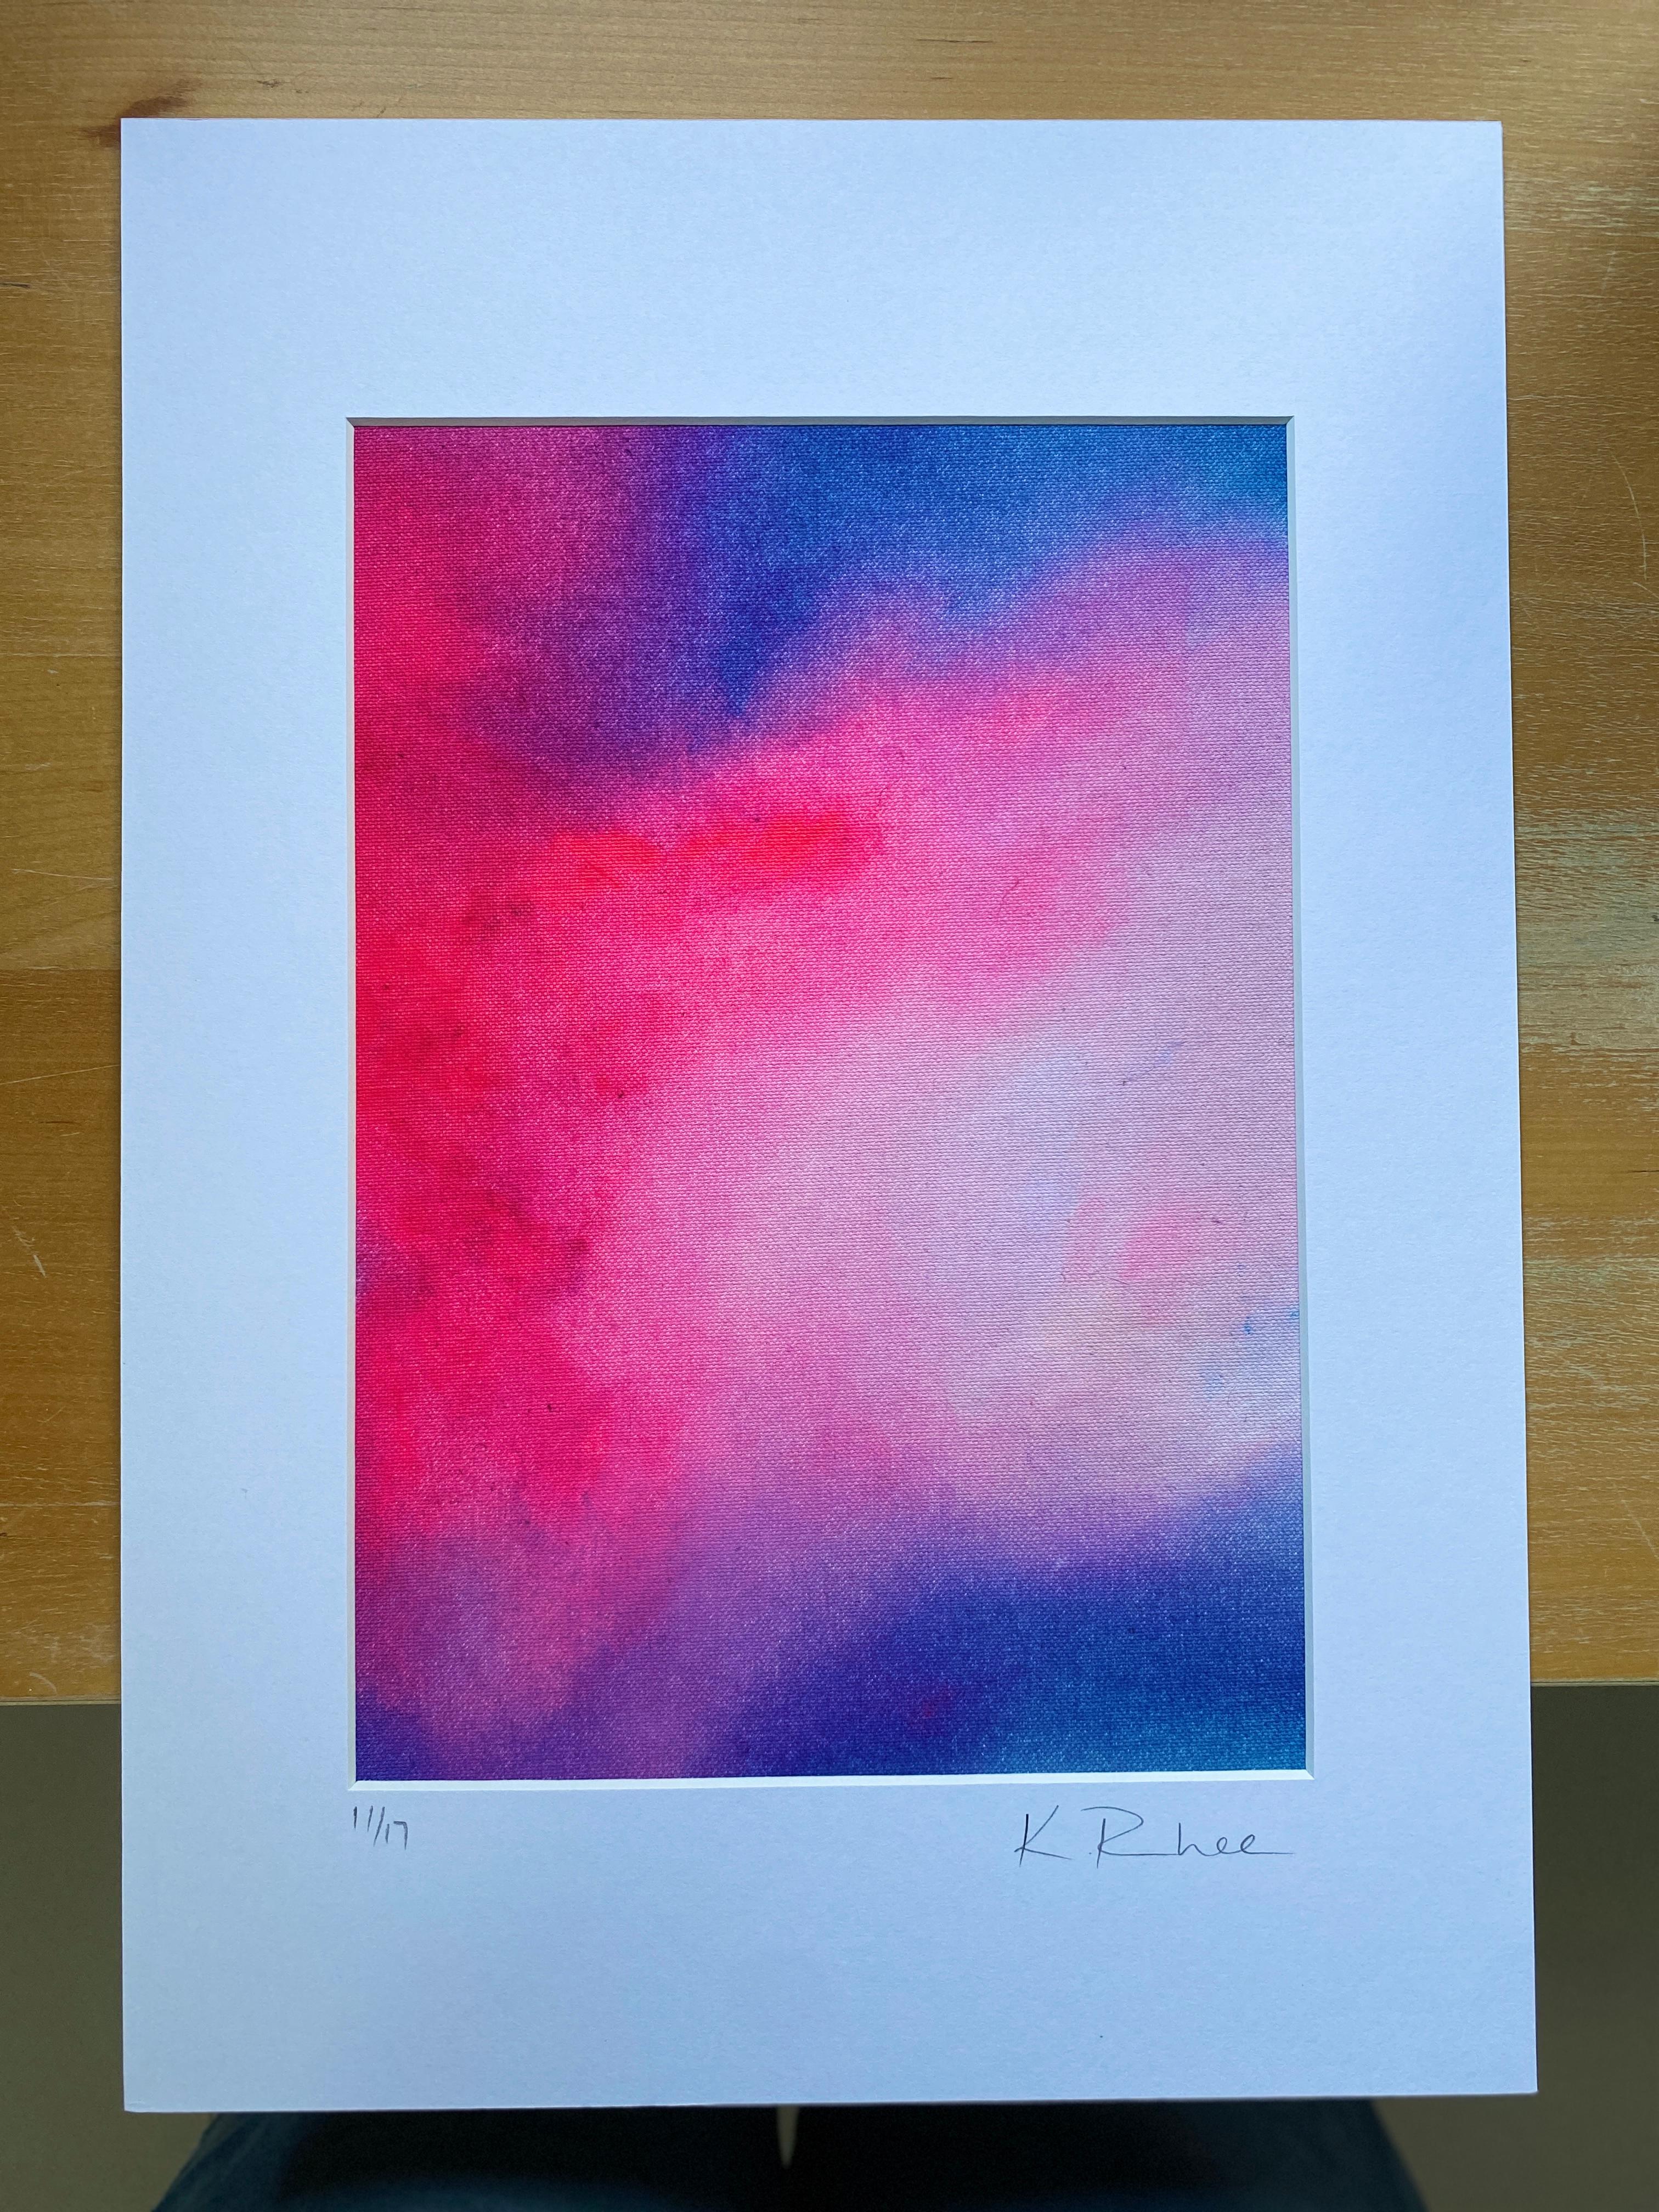 Gentle Blends Blue & Pink no2 small abstract on canvas framed in white mat board - Abstract Painting by Kathleen Rhee